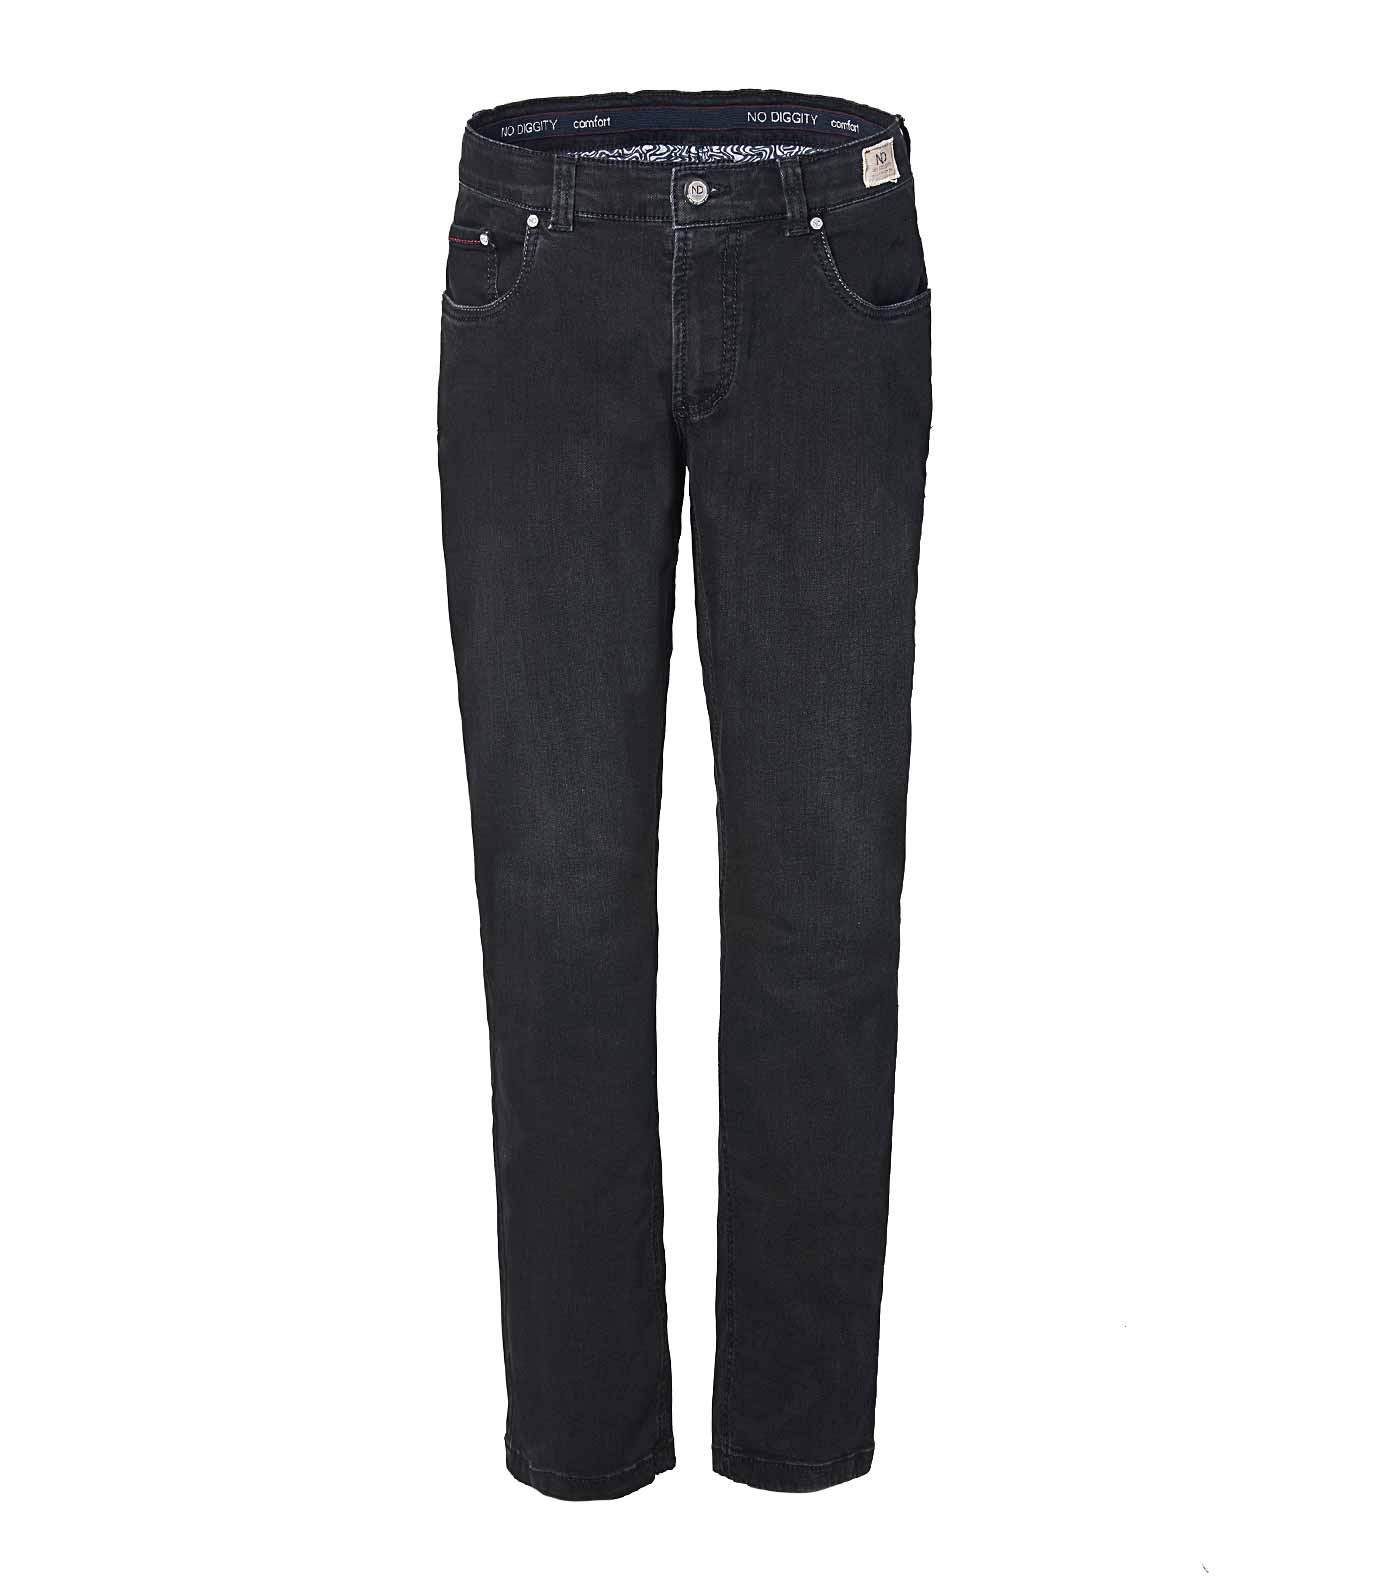 Real 5-Pocket-Jeans Denim, casual to go